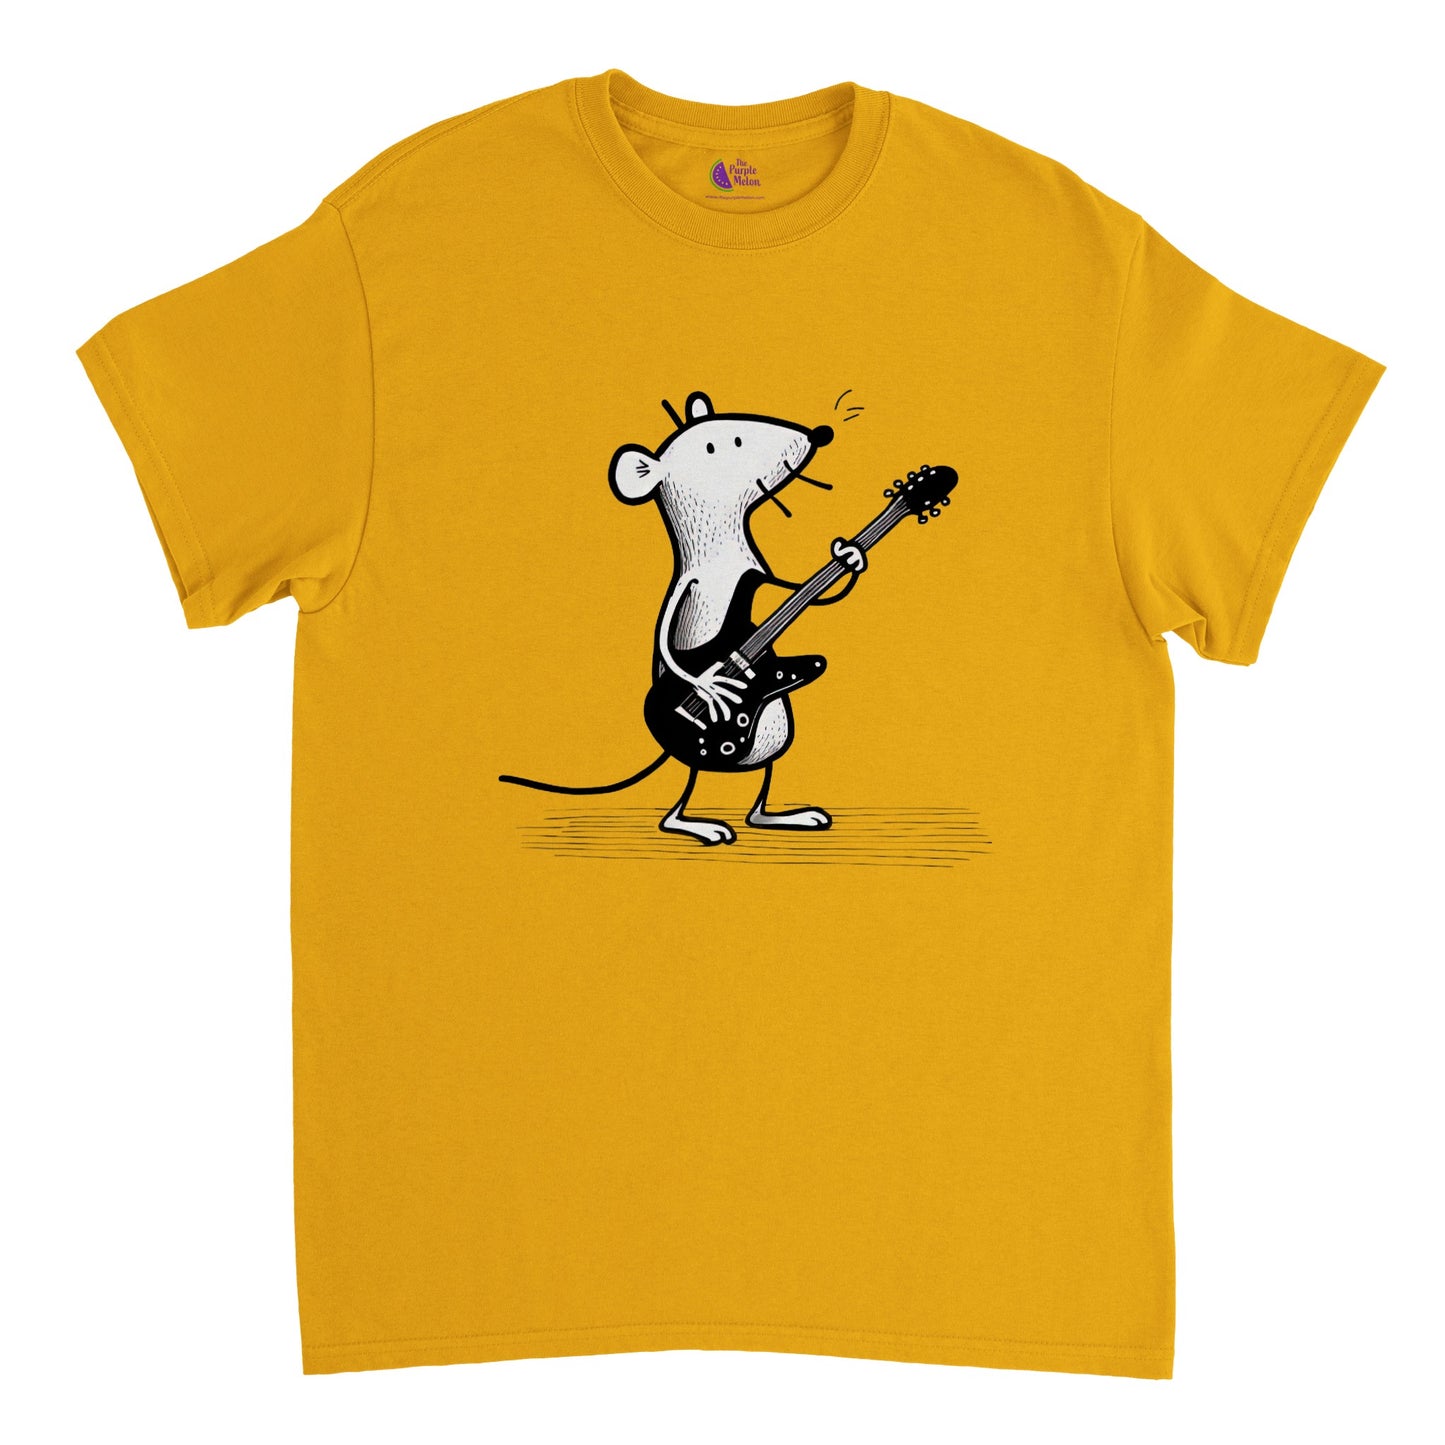 Gold t-shirt with a mouse playing guitar print